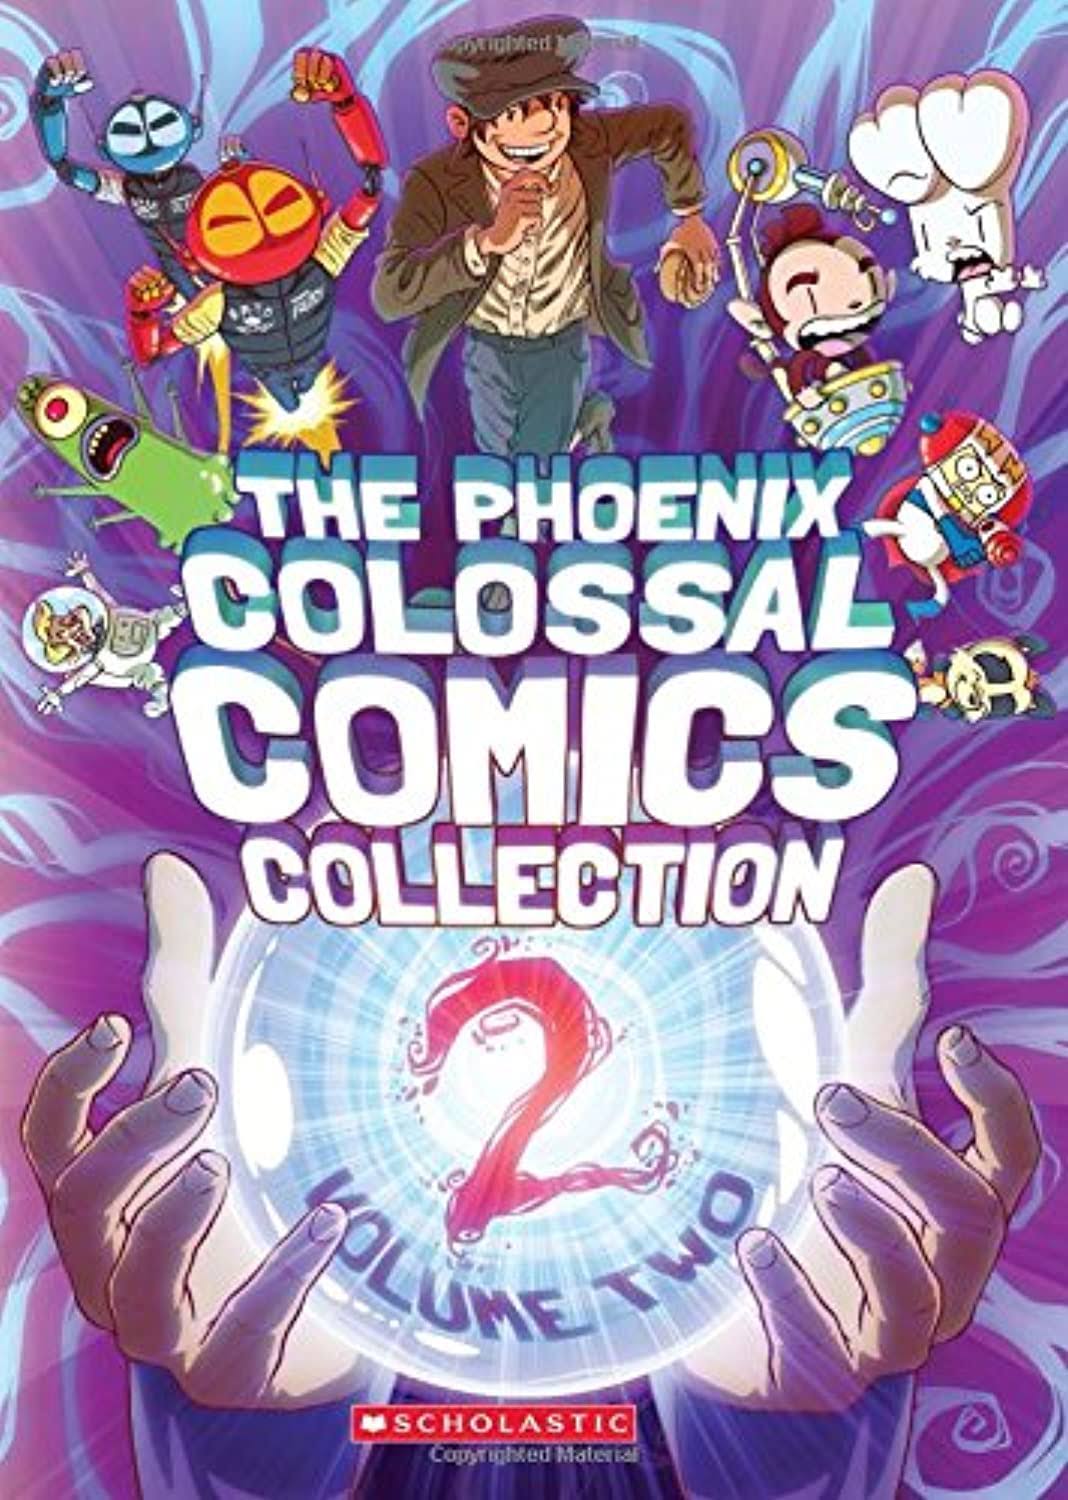 The Phoenix Colossal Comics Collection [Book]